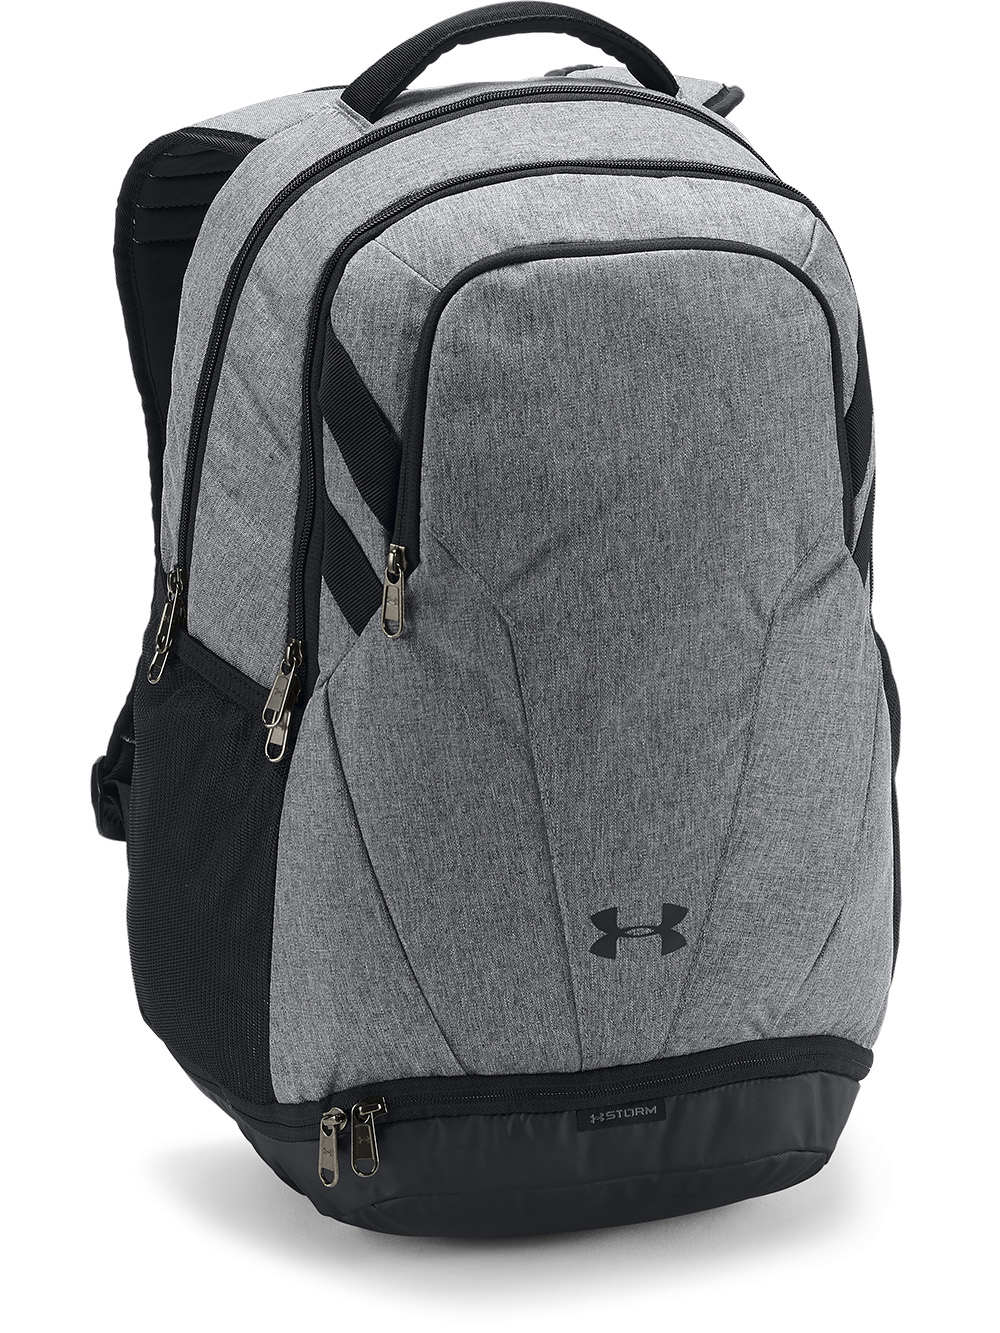 white and grey under armour backpack